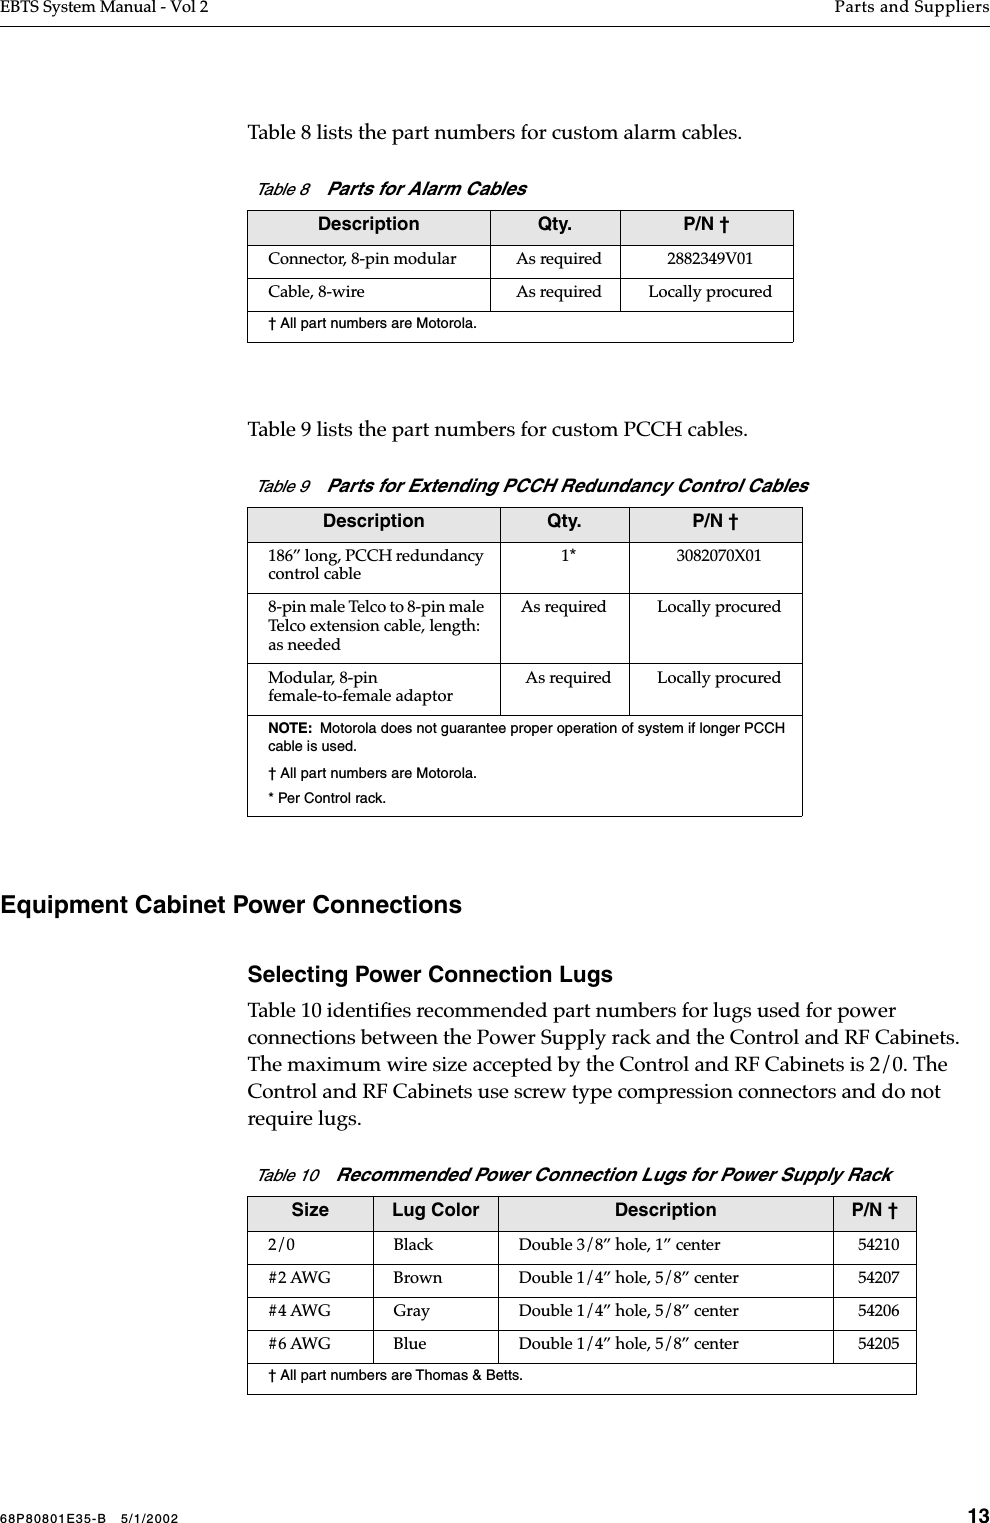 68P80801E35-B   5/1/2002 13EBTS System Manual - Vol 2 Parts and Suppliers Table 8 lists the part numbers for custom alarm cables.Table 9 lists the part numbers for custom PCCH cables.Equipment Cabinet Power ConnectionsSelecting Power Connection LugsTable 10 identiﬁes recommended part numbers for lugs used for power connections between the Power Supply rack and the Control and RF Cabinets. The maximum wire size accepted by the Control and RF Cabinets is 2/0. The Control and RF Cabinets use screw type compression connectors and do not require lugs.Table 8    Parts for Alarm CablesDescription Qty. P/N †Connector, 8-pin modular As required 2882349V01Cable, 8-wire As required Locally procured† All part numbers are Motorola.Table 9    Parts for Extending PCCH Redundancy Control CablesDescription Qty. P/N †186” long, PCCH redundancy control cable1* 3082070X018-pin male Telco to 8-pin male Telco extension cable, length: as neededAs required Locally procuredModular, 8-pin female-to-female adaptorAs required Locally procuredNOTE:  Motorola does not guarantee proper operation of system if longer PCCH cable is used.† All part numbers are Motorola.* Per Control rack.Table 10    Recommended Power Connection Lugs for Power Supply RackSize Lug Color Description P/N †2/0 Black Double 3/8” hole, 1” center 54210#2 AWG Brown Double 1/4” hole, 5/8” center 54207#4 AWG Gray Double 1/4” hole, 5/8” center 54206#6 AWG Blue Double 1/4” hole, 5/8” center 54205† All part numbers are Thomas &amp; Betts.